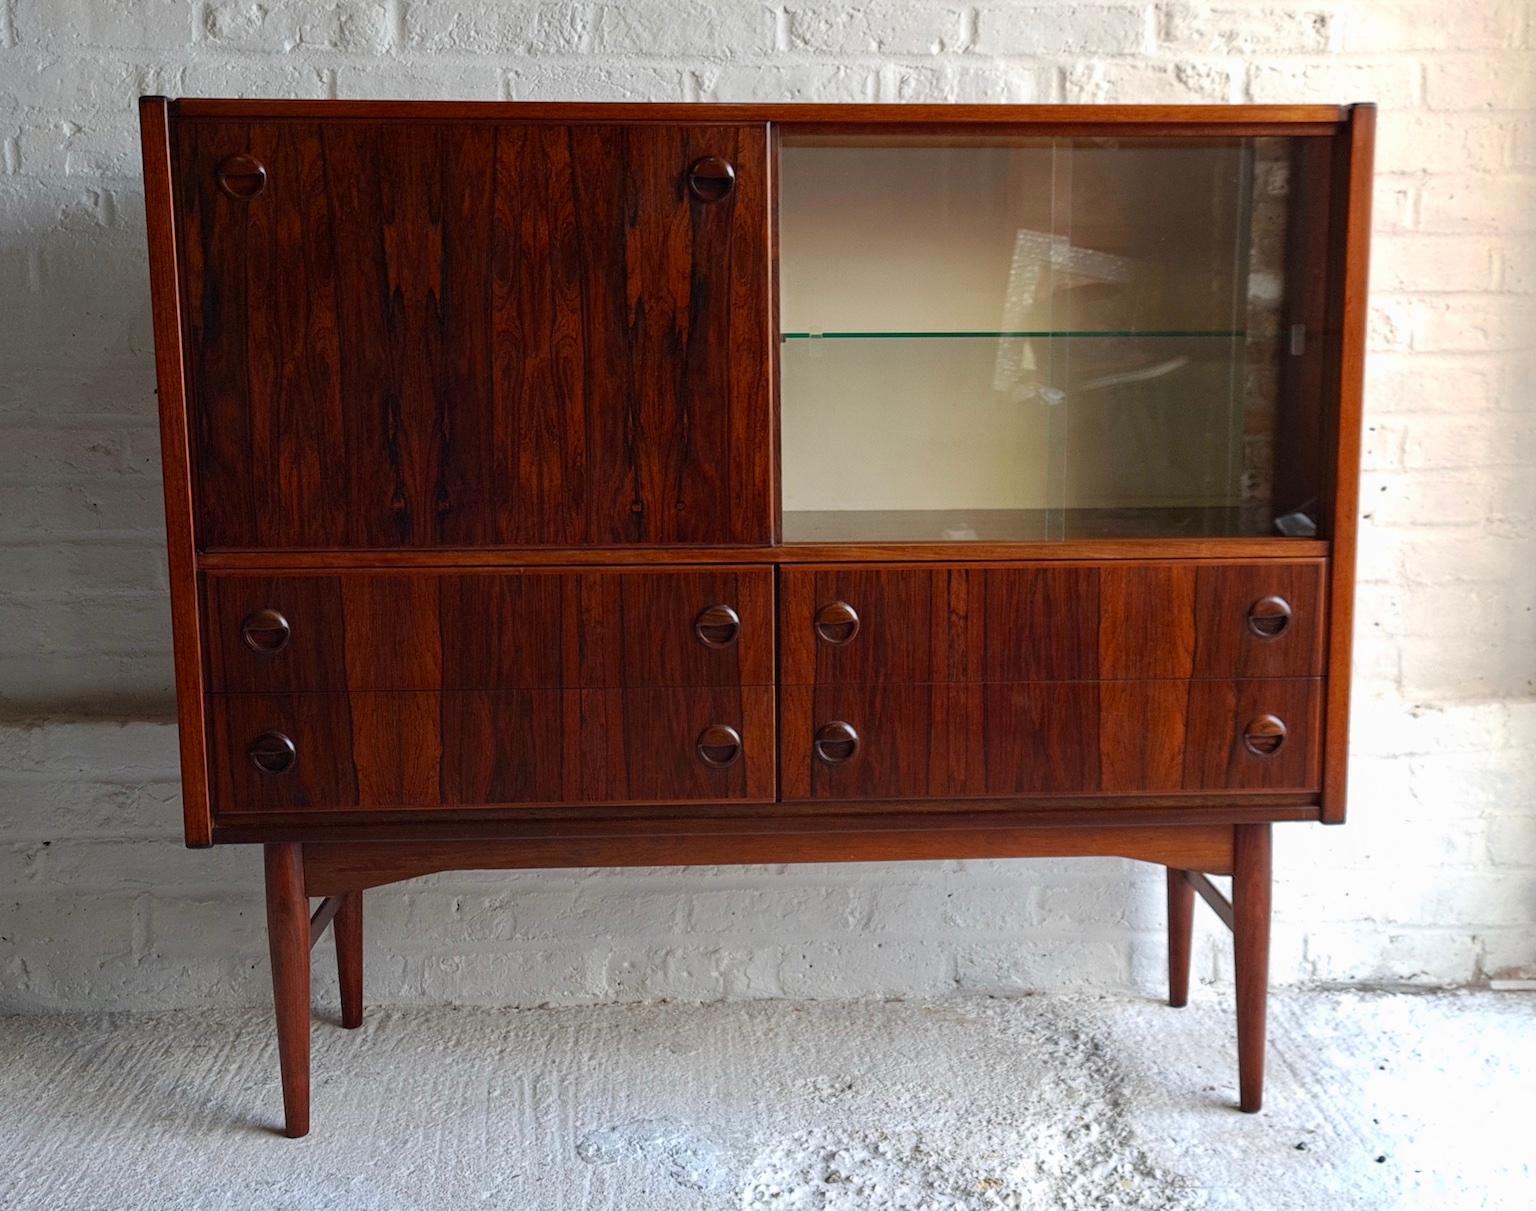 1960s sideboard with drinks cabinet